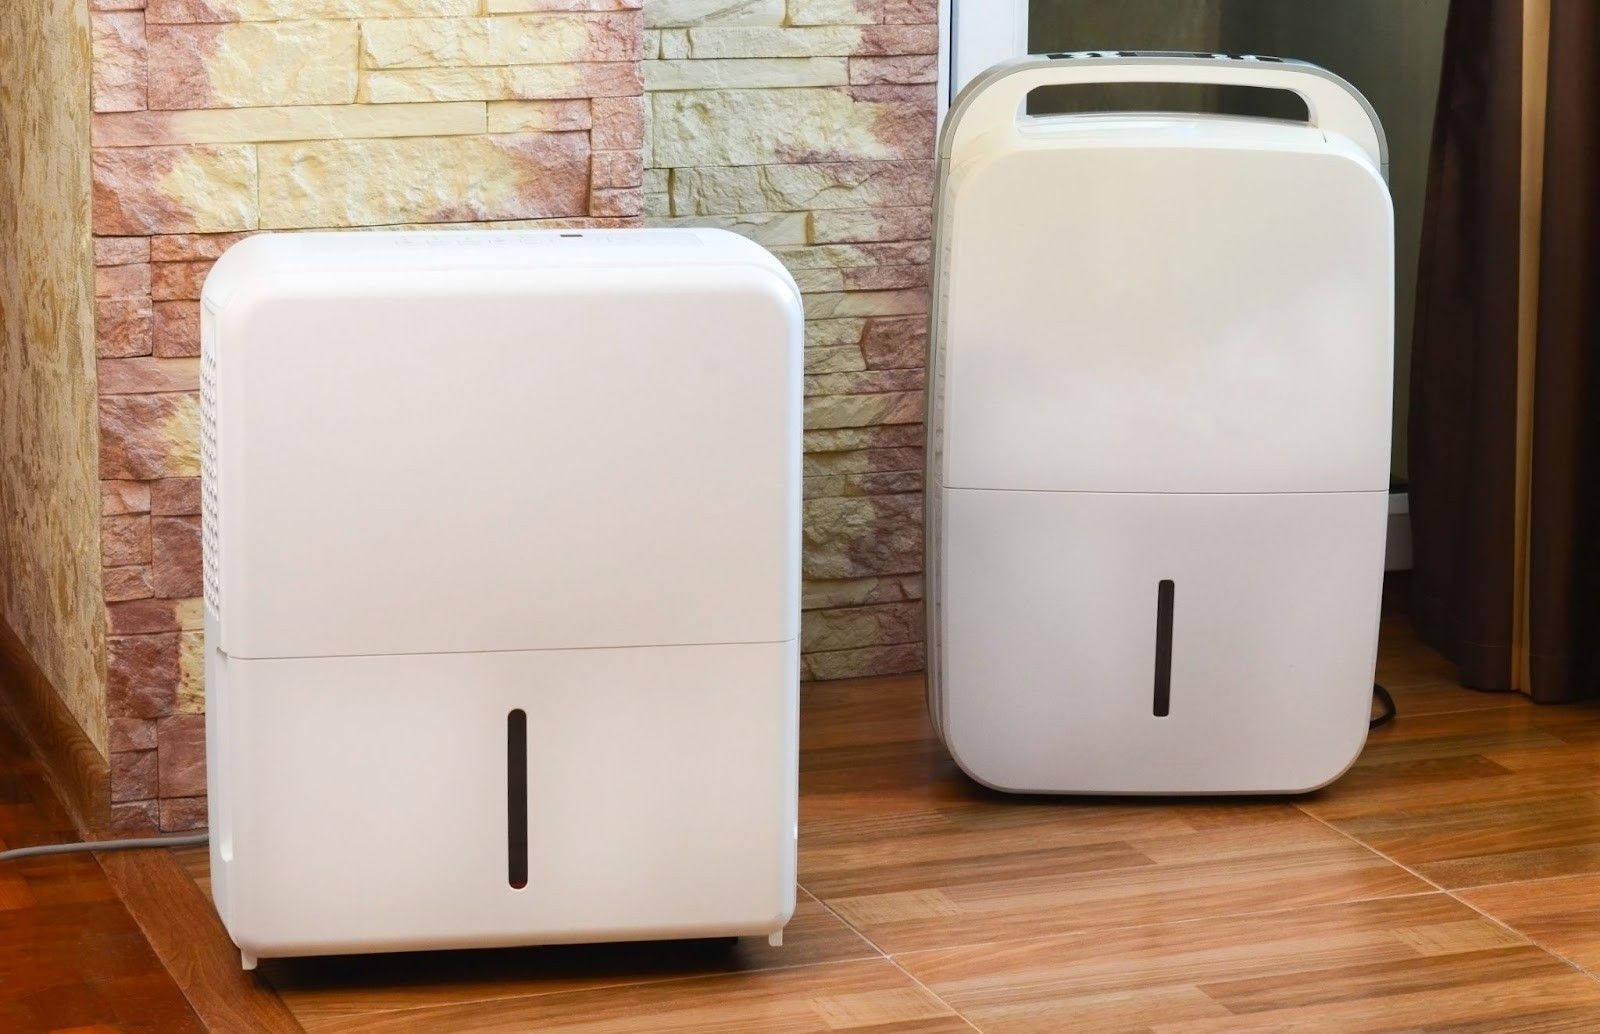 Two white dehumidifiers are sitting next to each other on a wooden floor in a room.